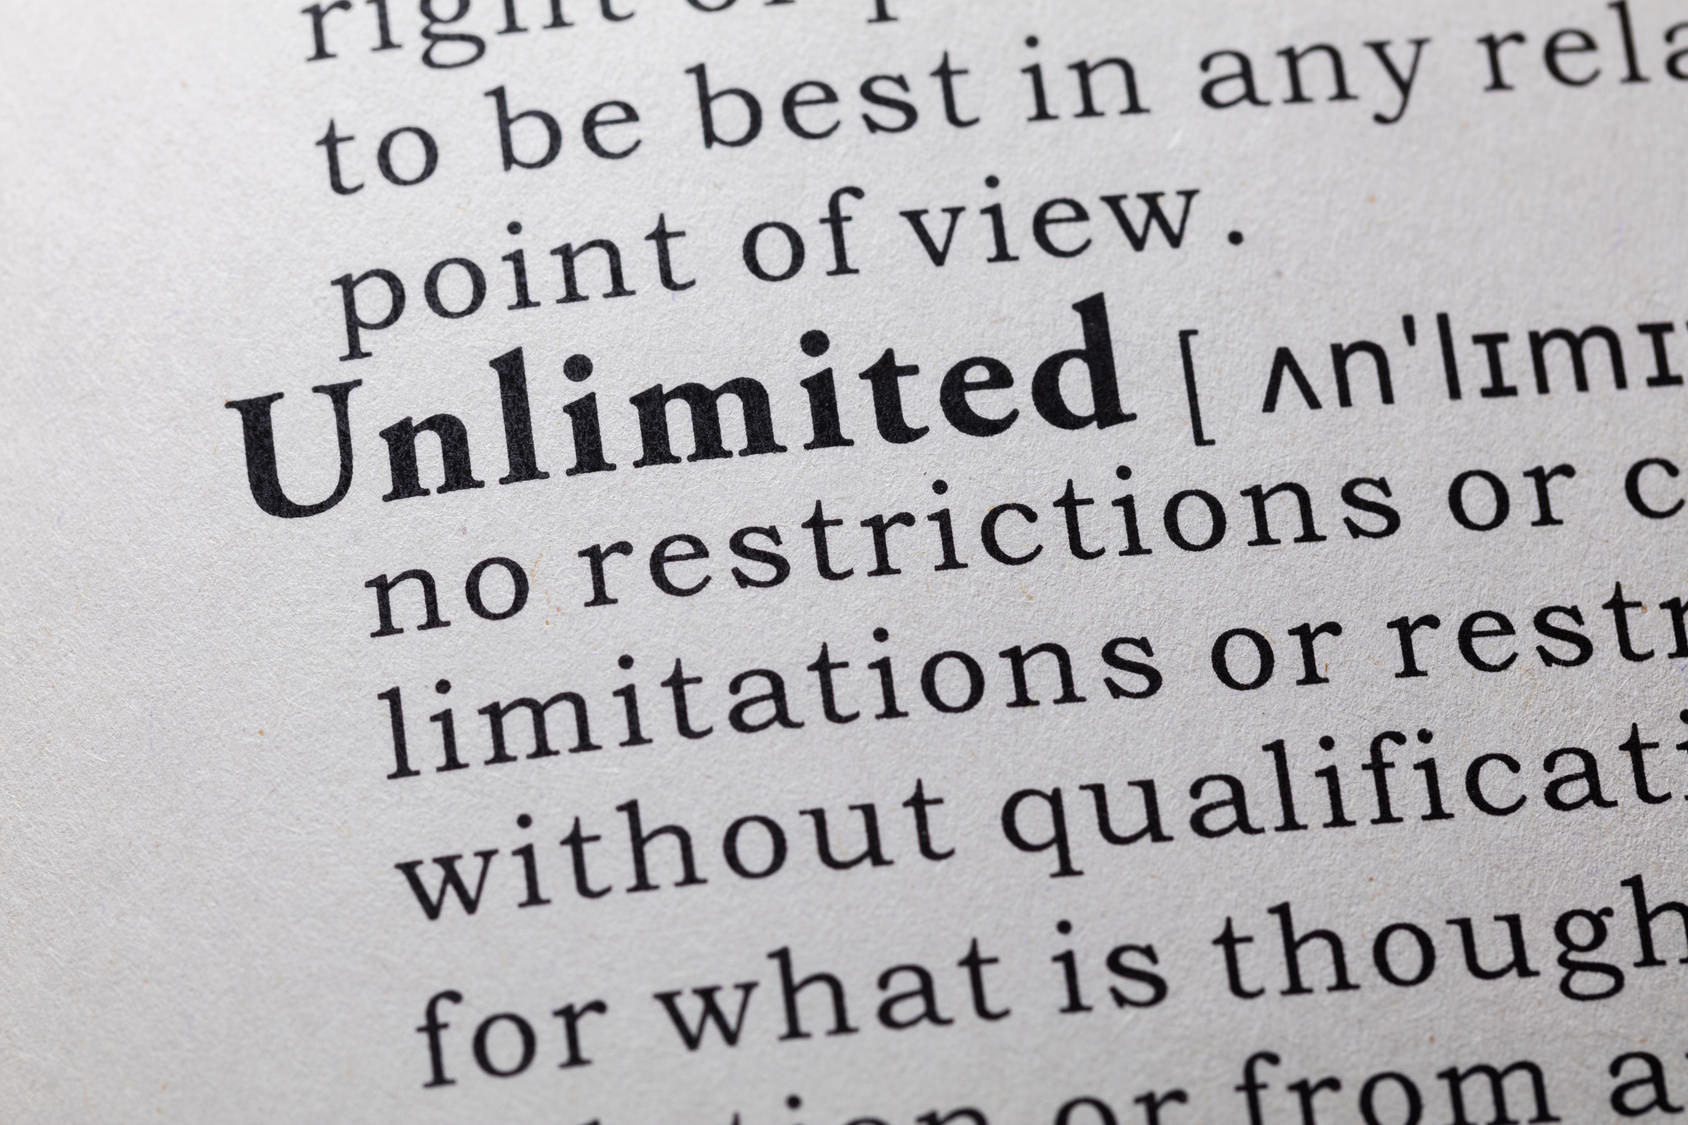 With ‘Unlimited’, Network Management and Capacity become Paramount